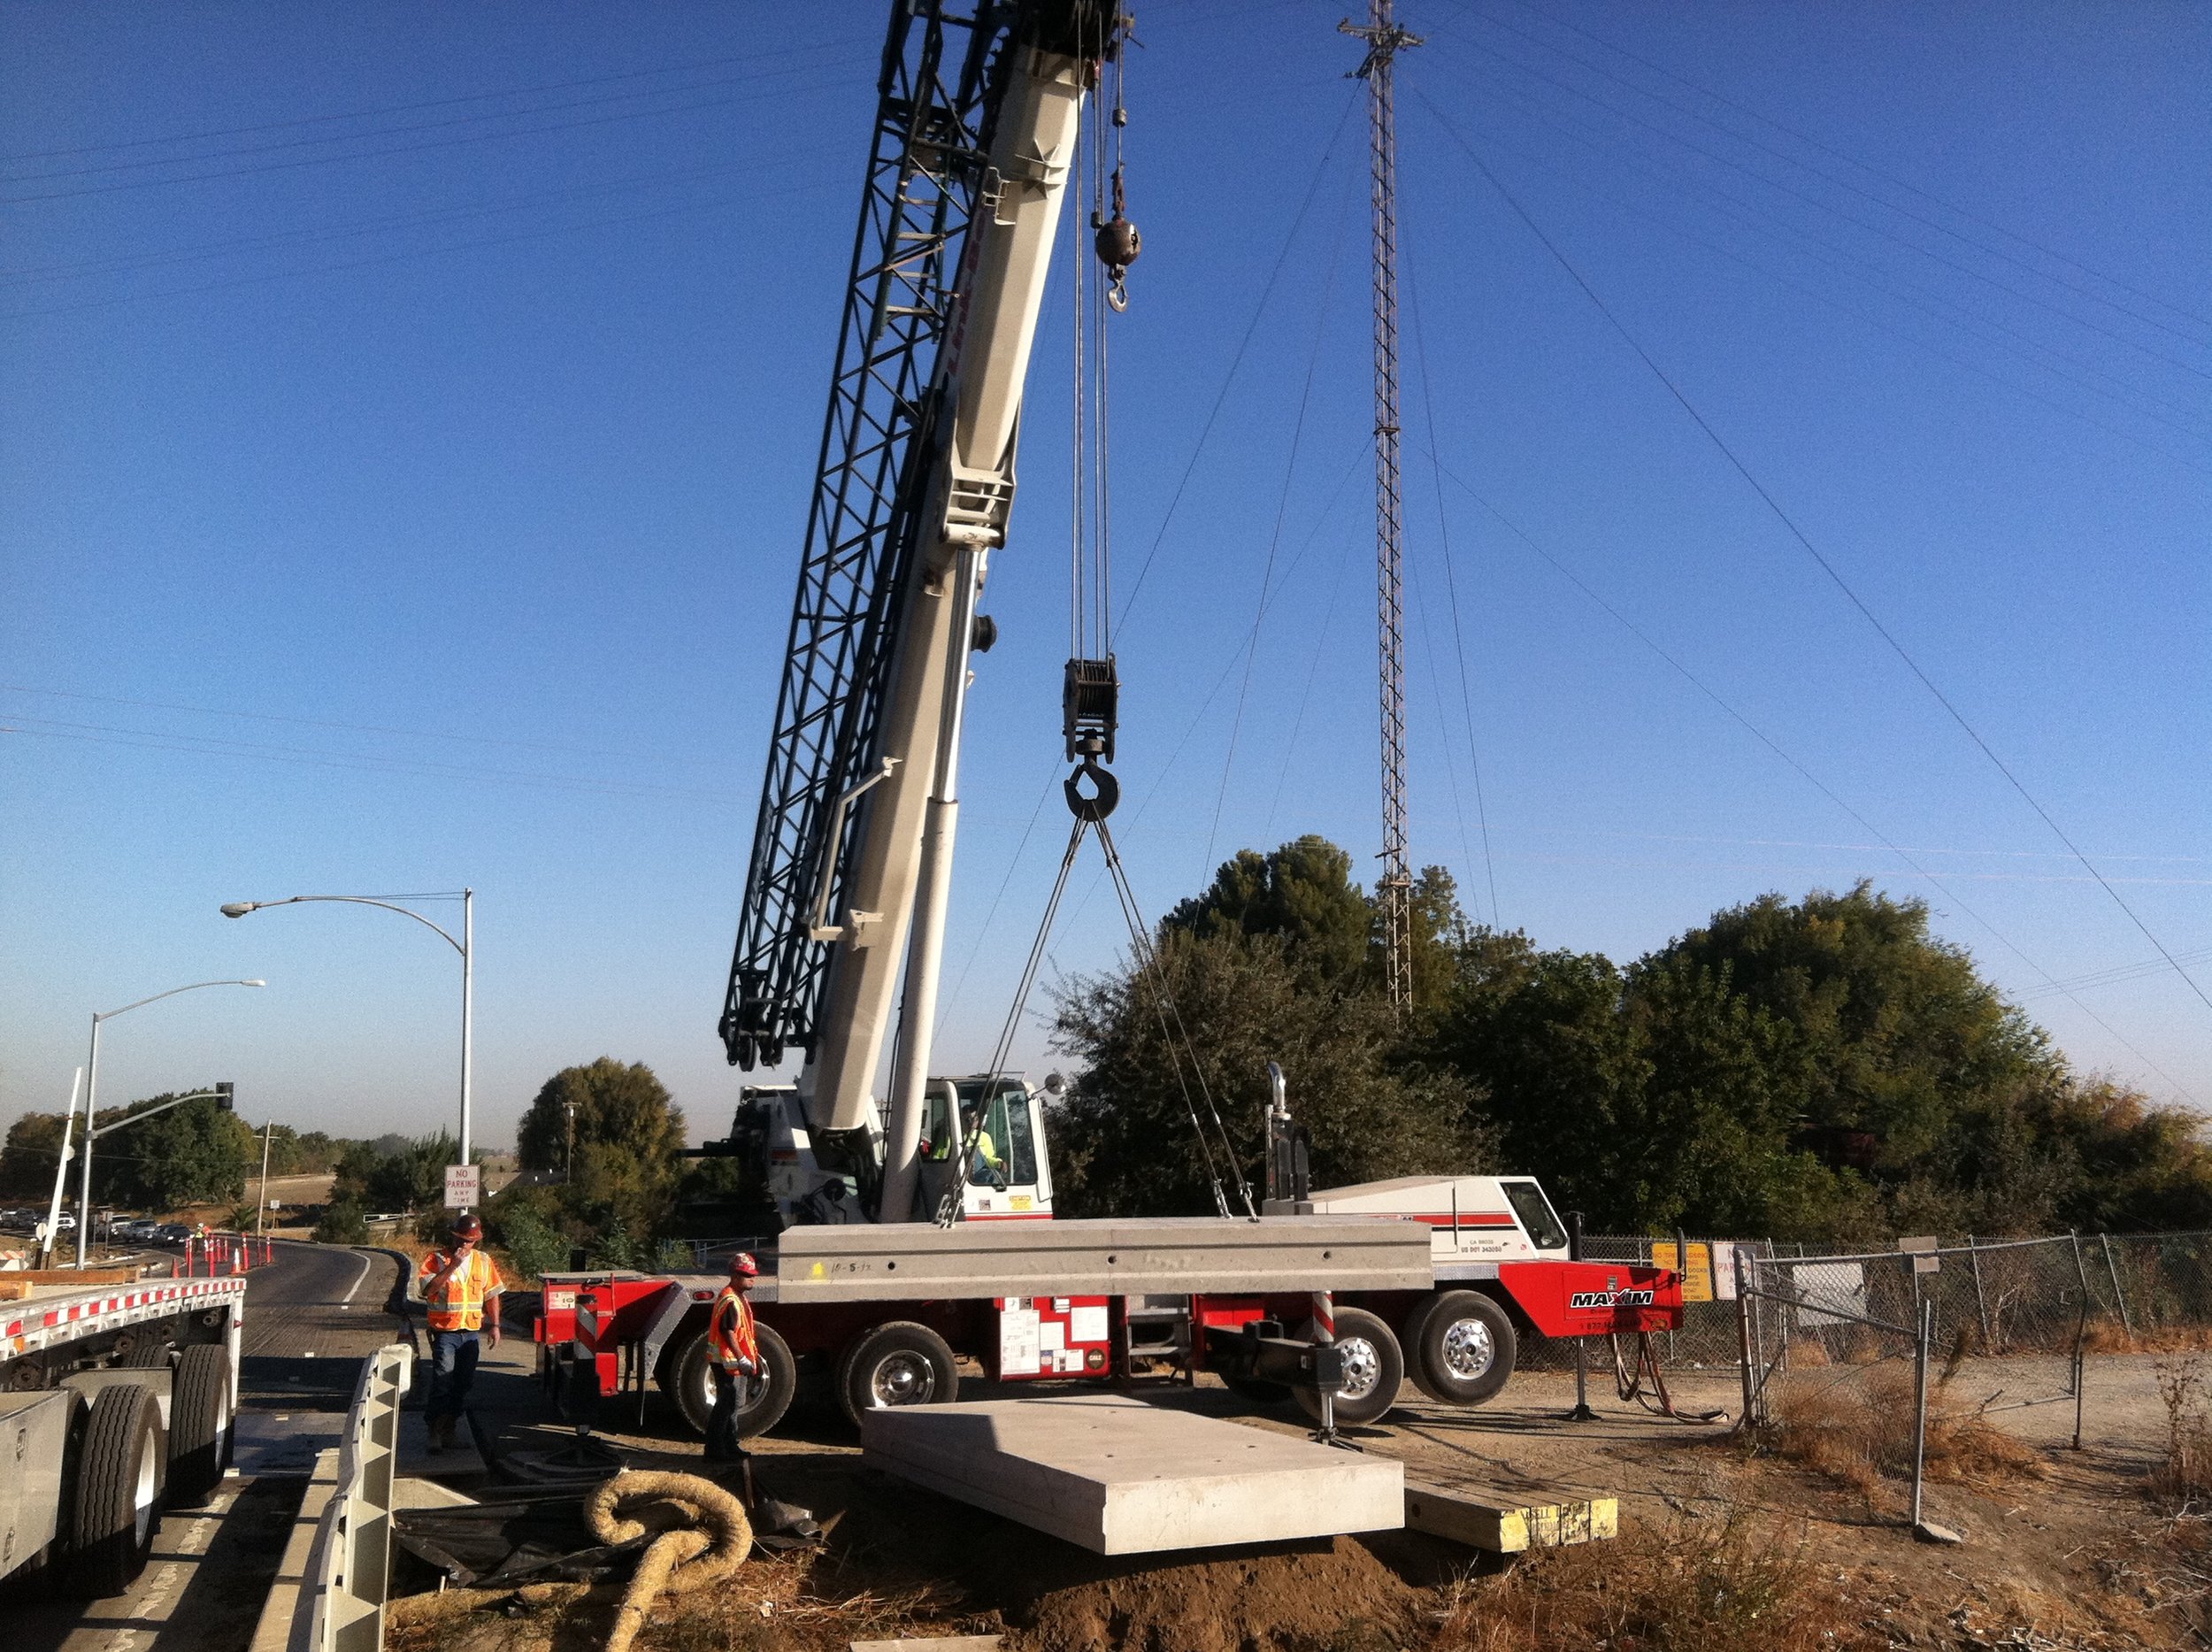   Welcome To Valentine Corporation   Project: San Joaquin County - Tracy Blvd Bridge Approach  If It's Difficult Or Unusual, Call Us!   Contact Us  